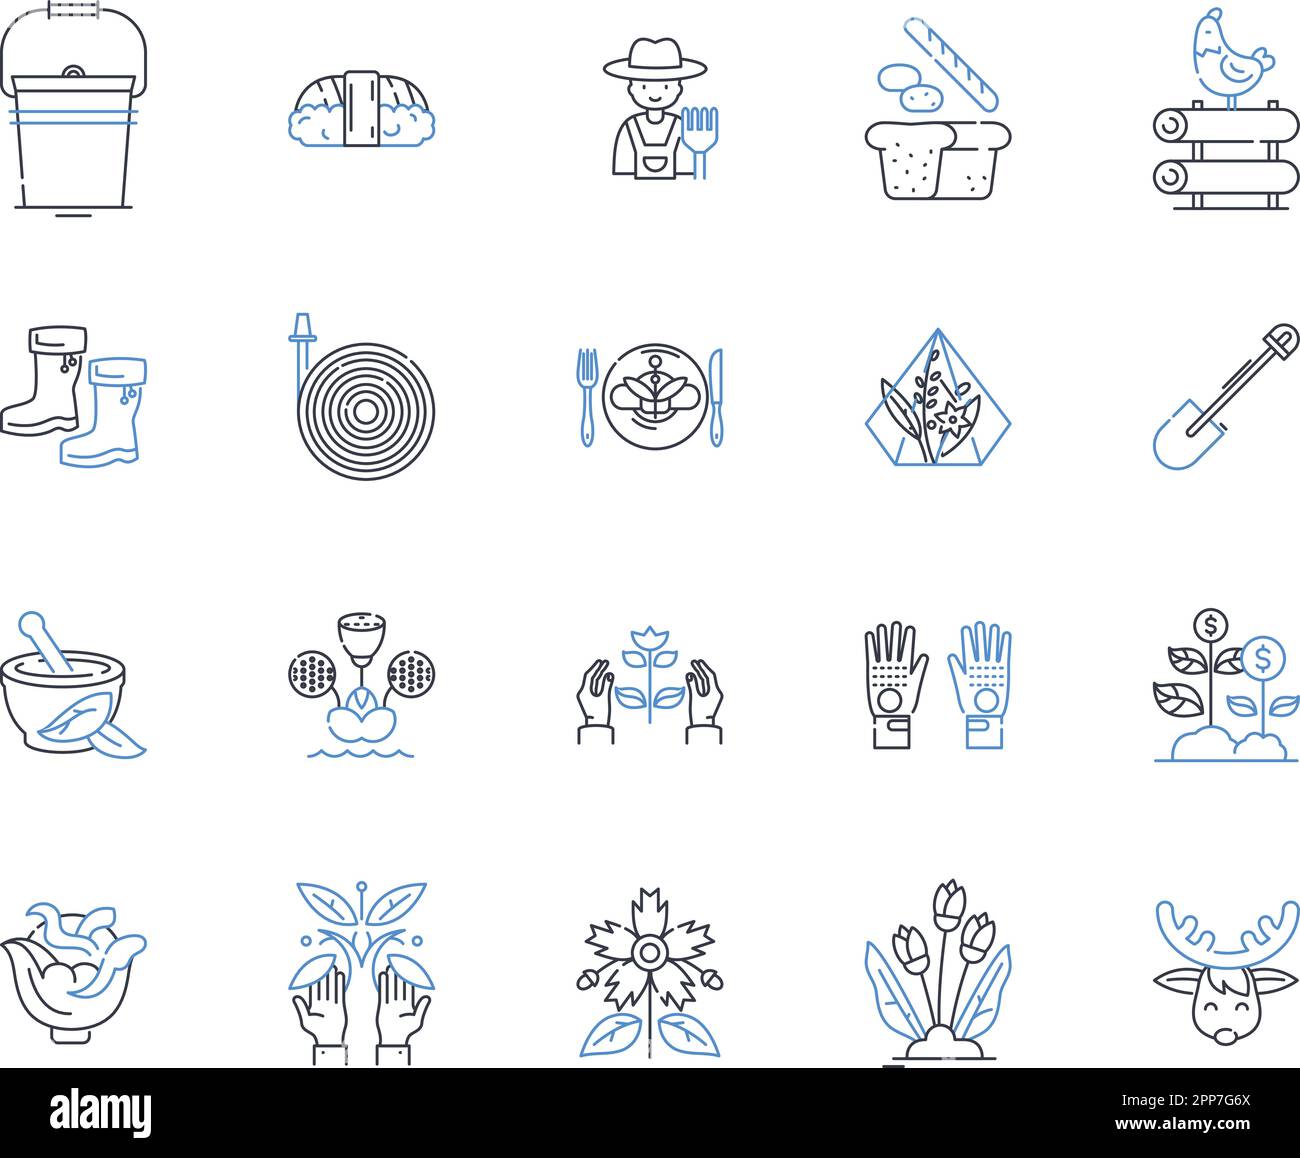 Brickworks factory line icons collection. Manufacturing, Construction, Masonry, Production, Engineering, Architecture, Industrial vector and linear Stock Vector